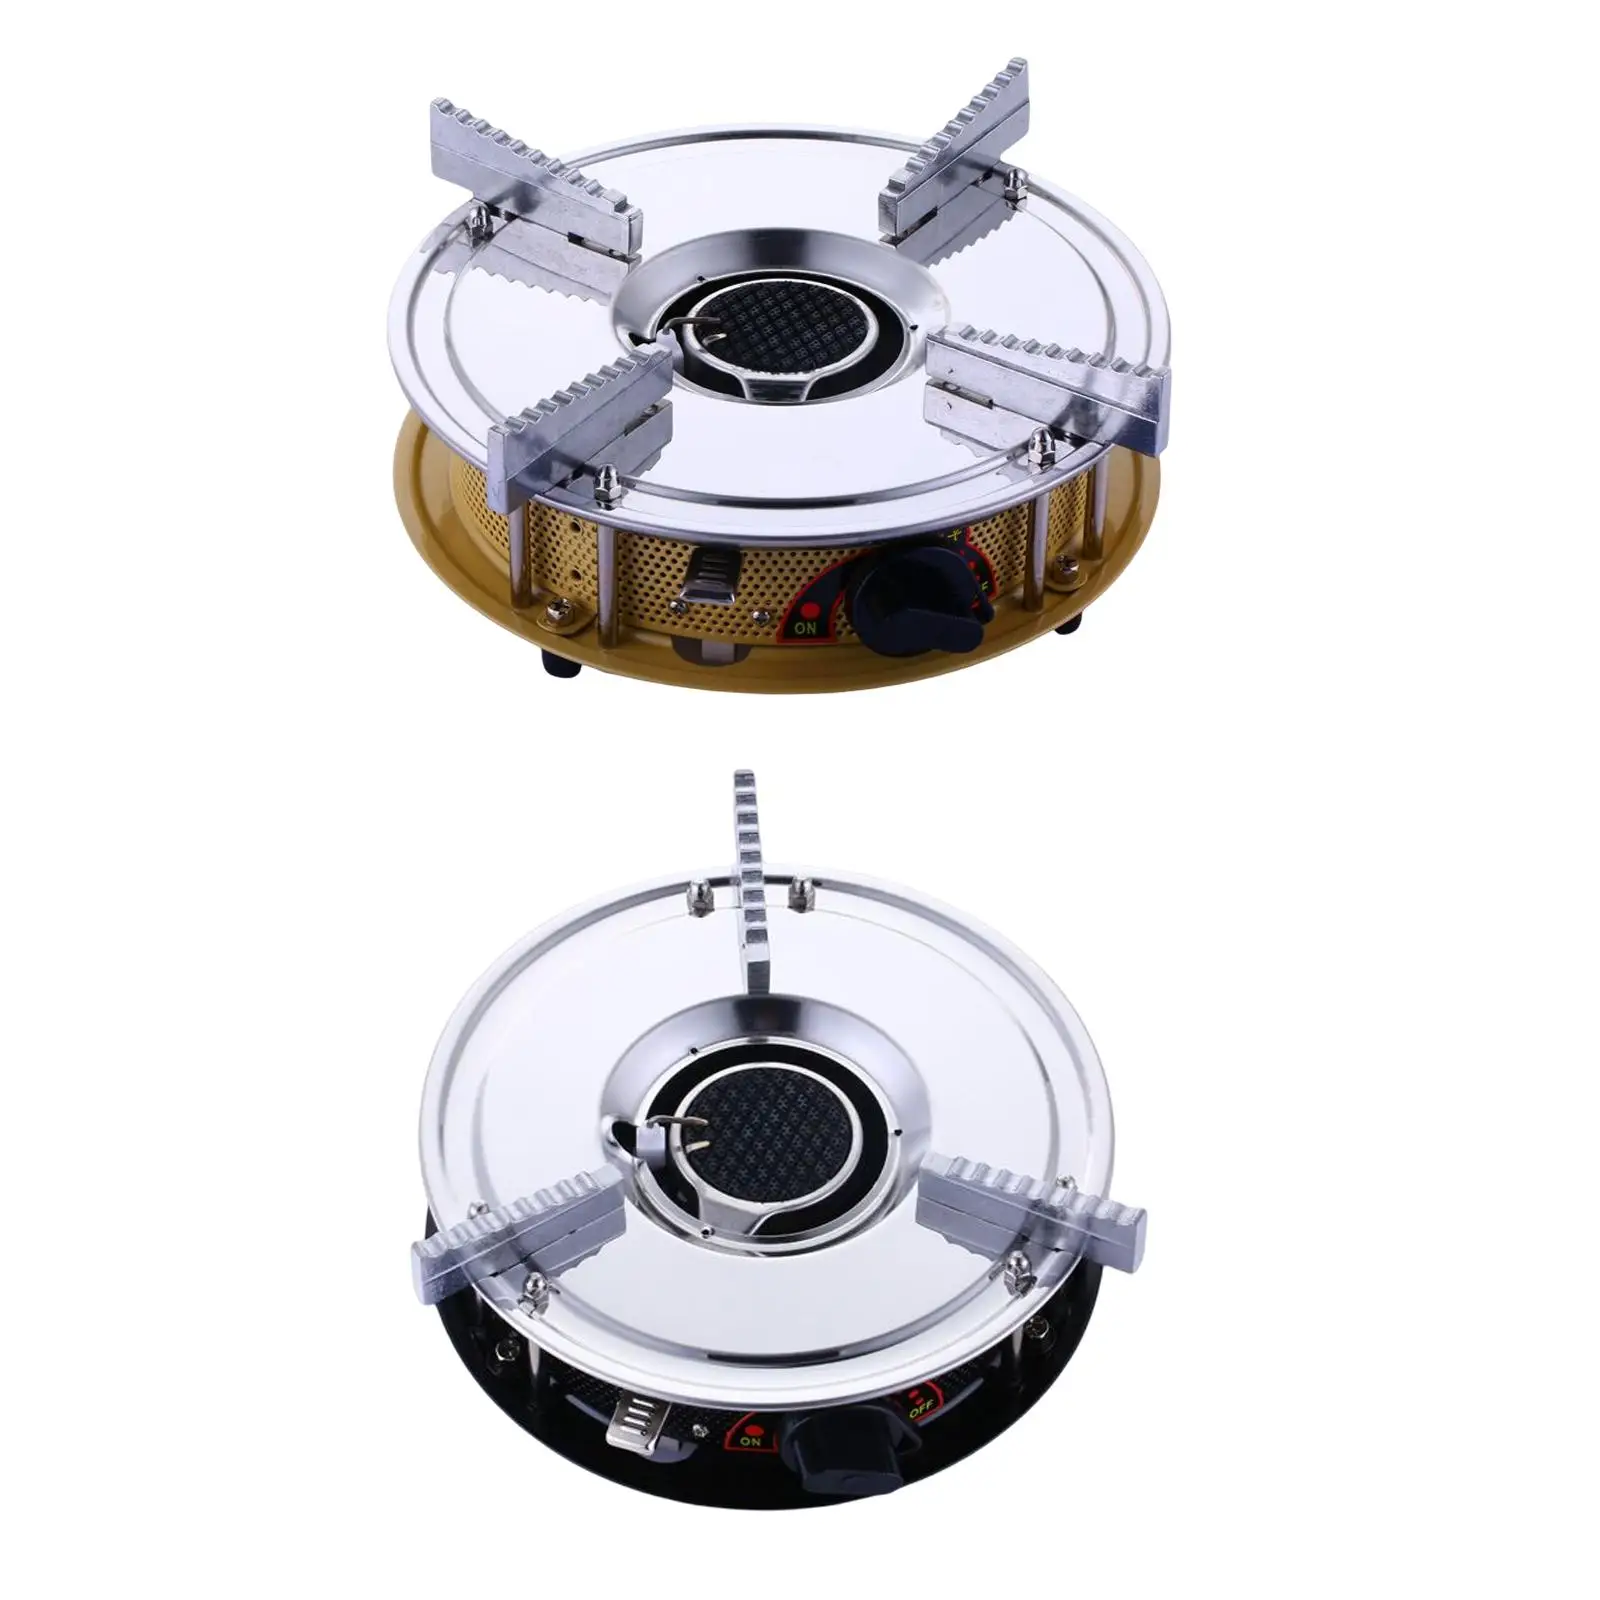 Portable Camping Cookware Cooking Gear Adjustable Flame Equipment